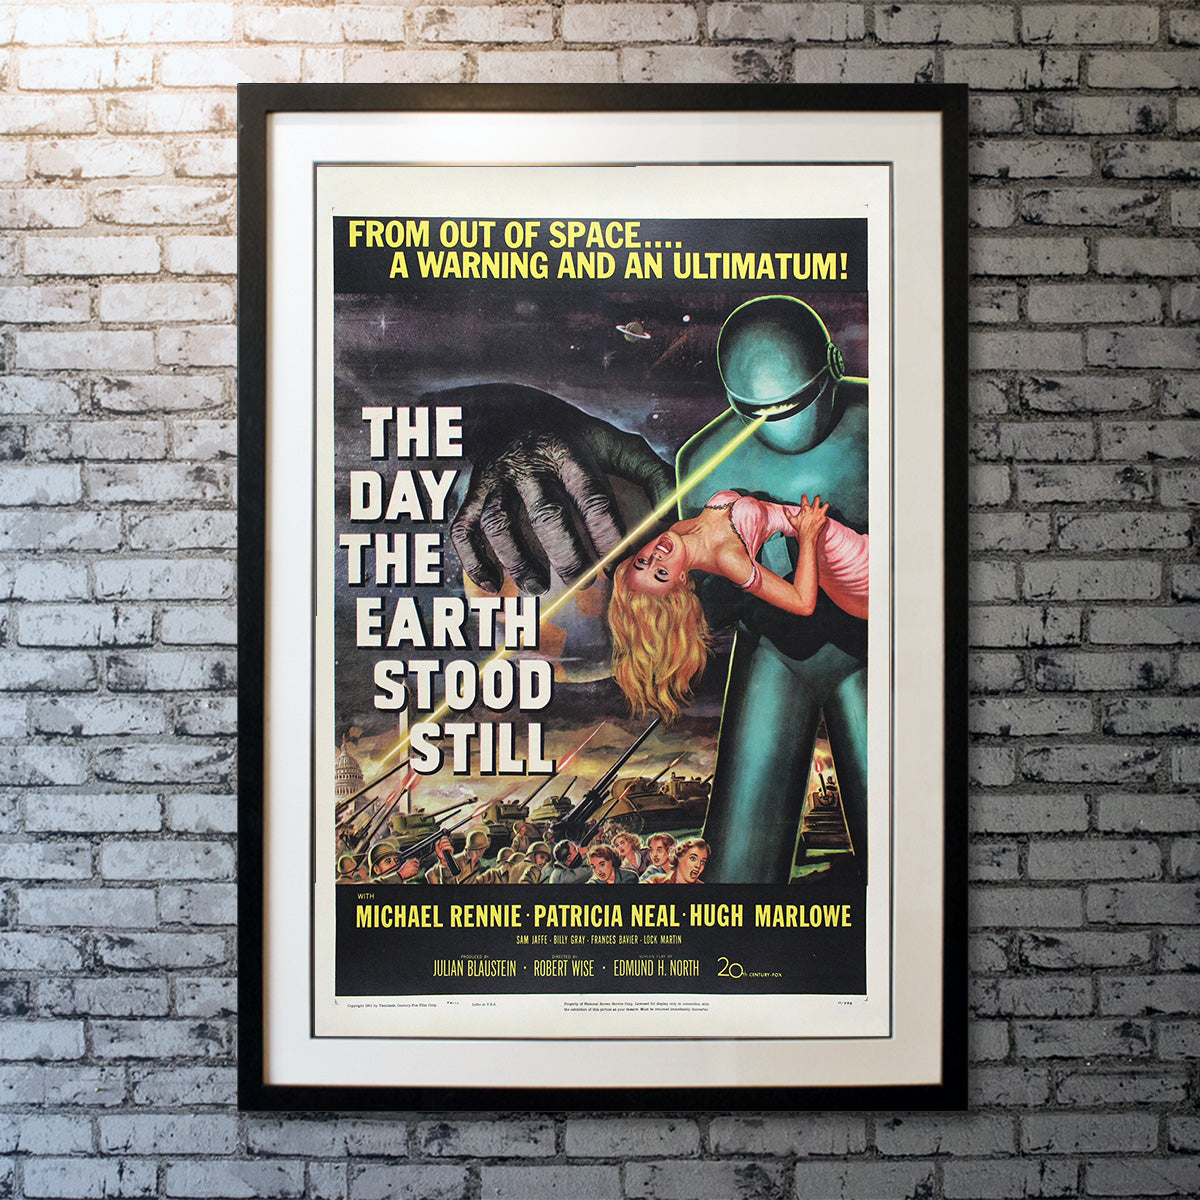 Original Movie Poster of The Day The Earth Stood Still (1951)